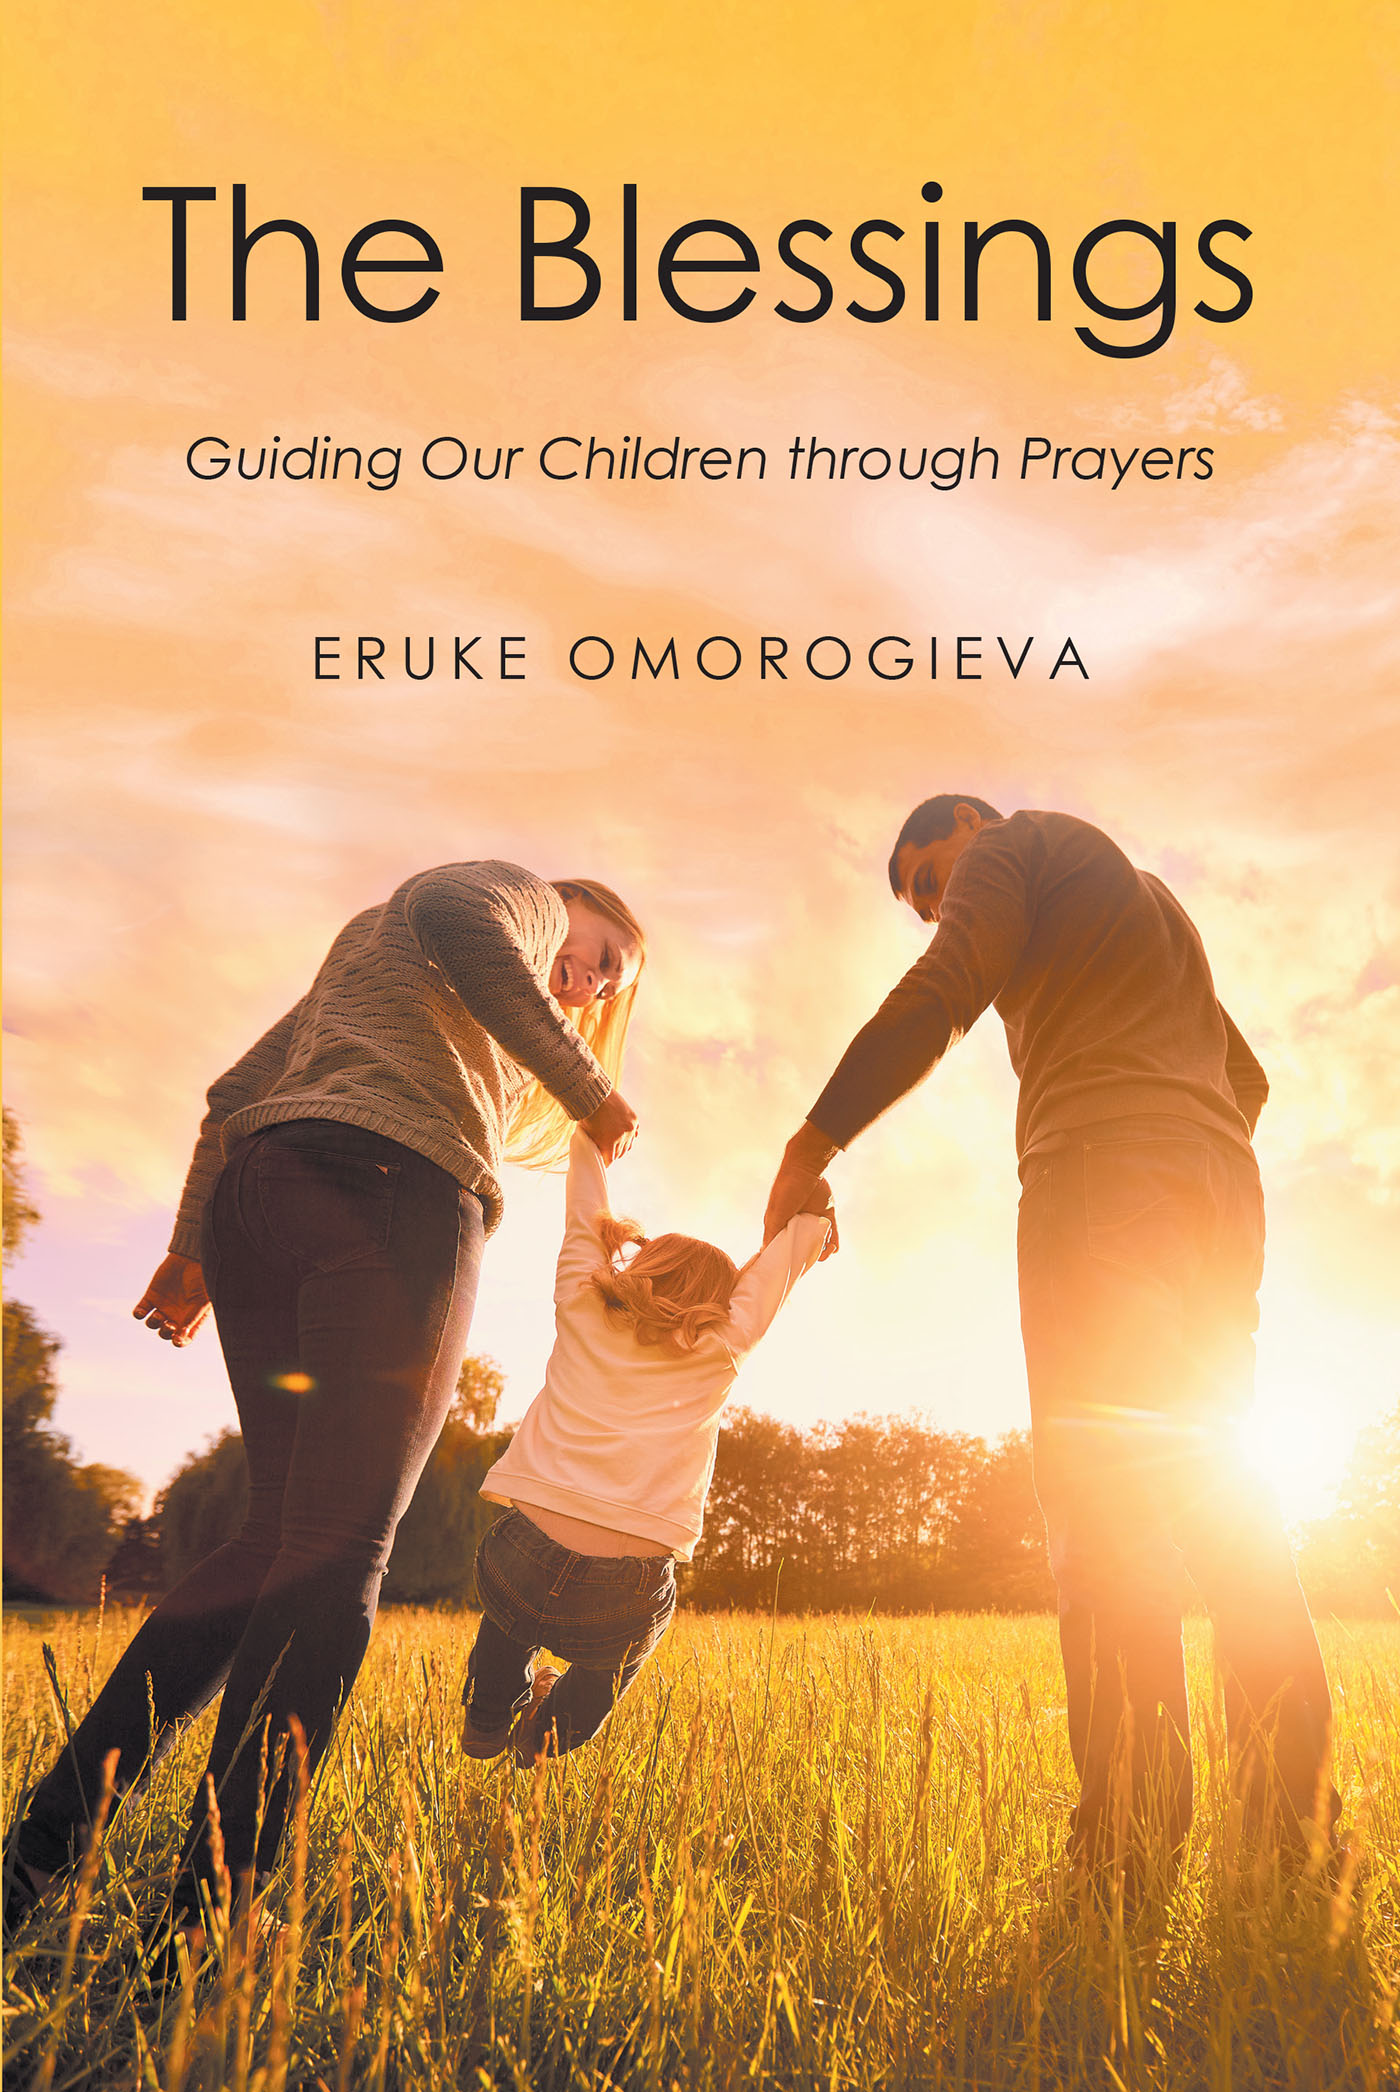 Eruke Omorogieva’s Newly Released "The Blessings: Guiding Our Children Through Prayers" is a Thoughtful Guide to Praying for Upcoming Generations